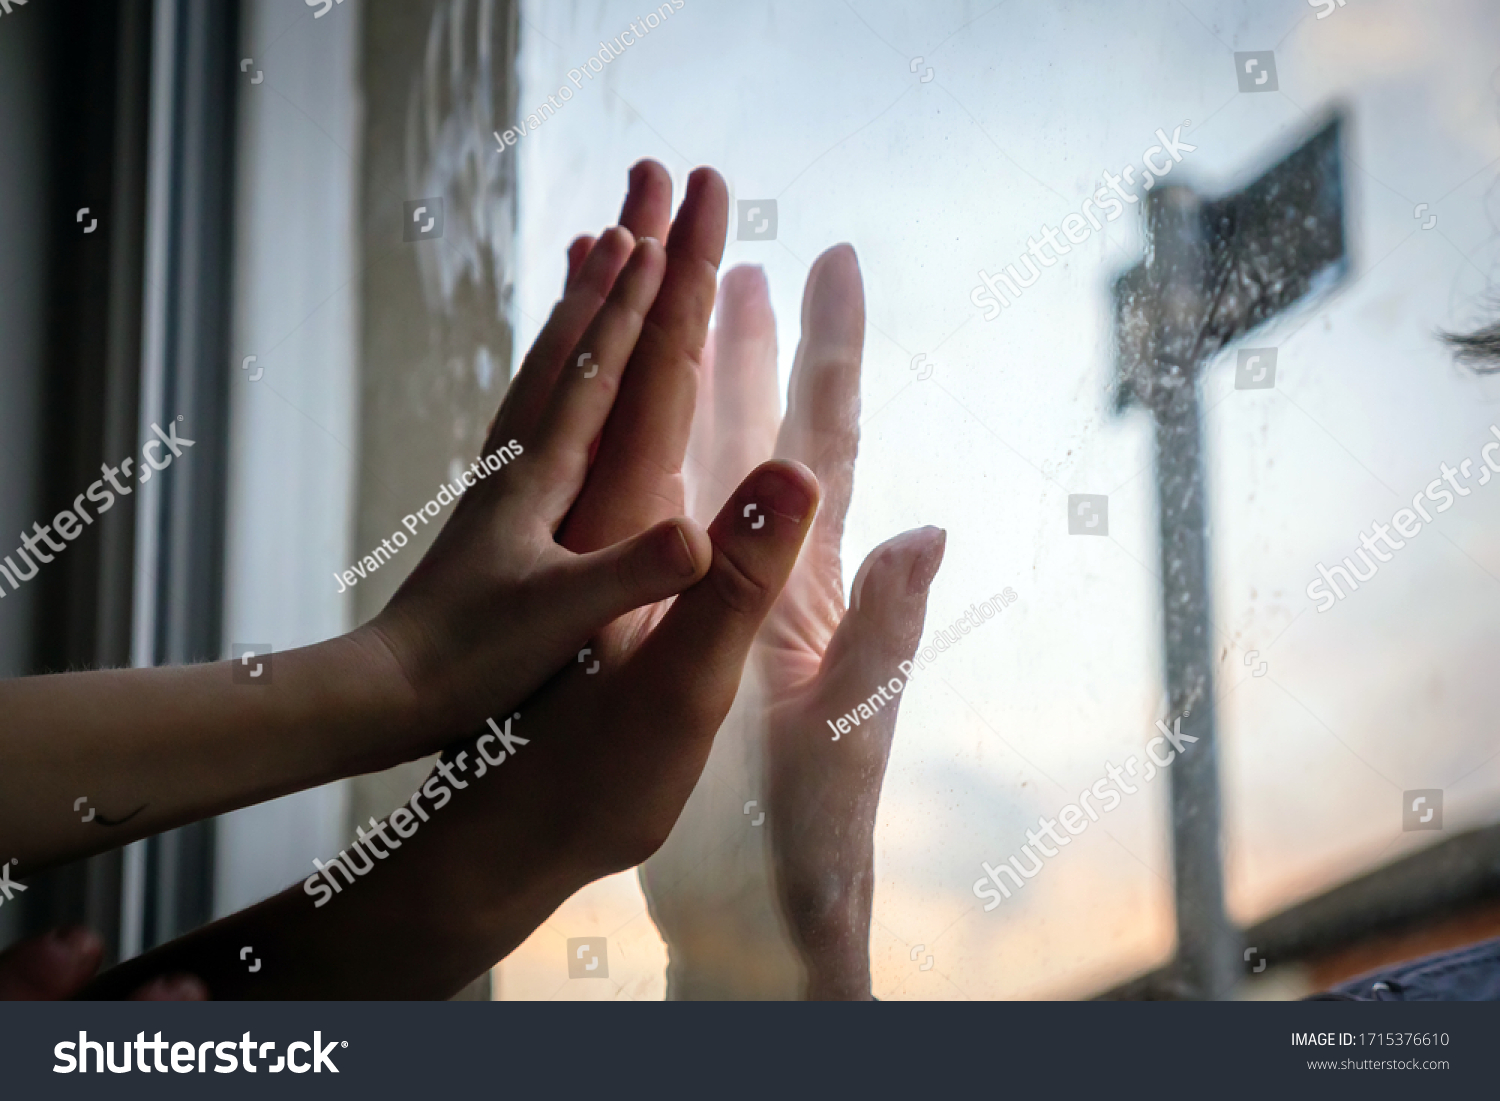 social distancing among the family, hand of the woman and her grandchildren on window plane, concept coronavirus and covid-19 pandemic #1715376610